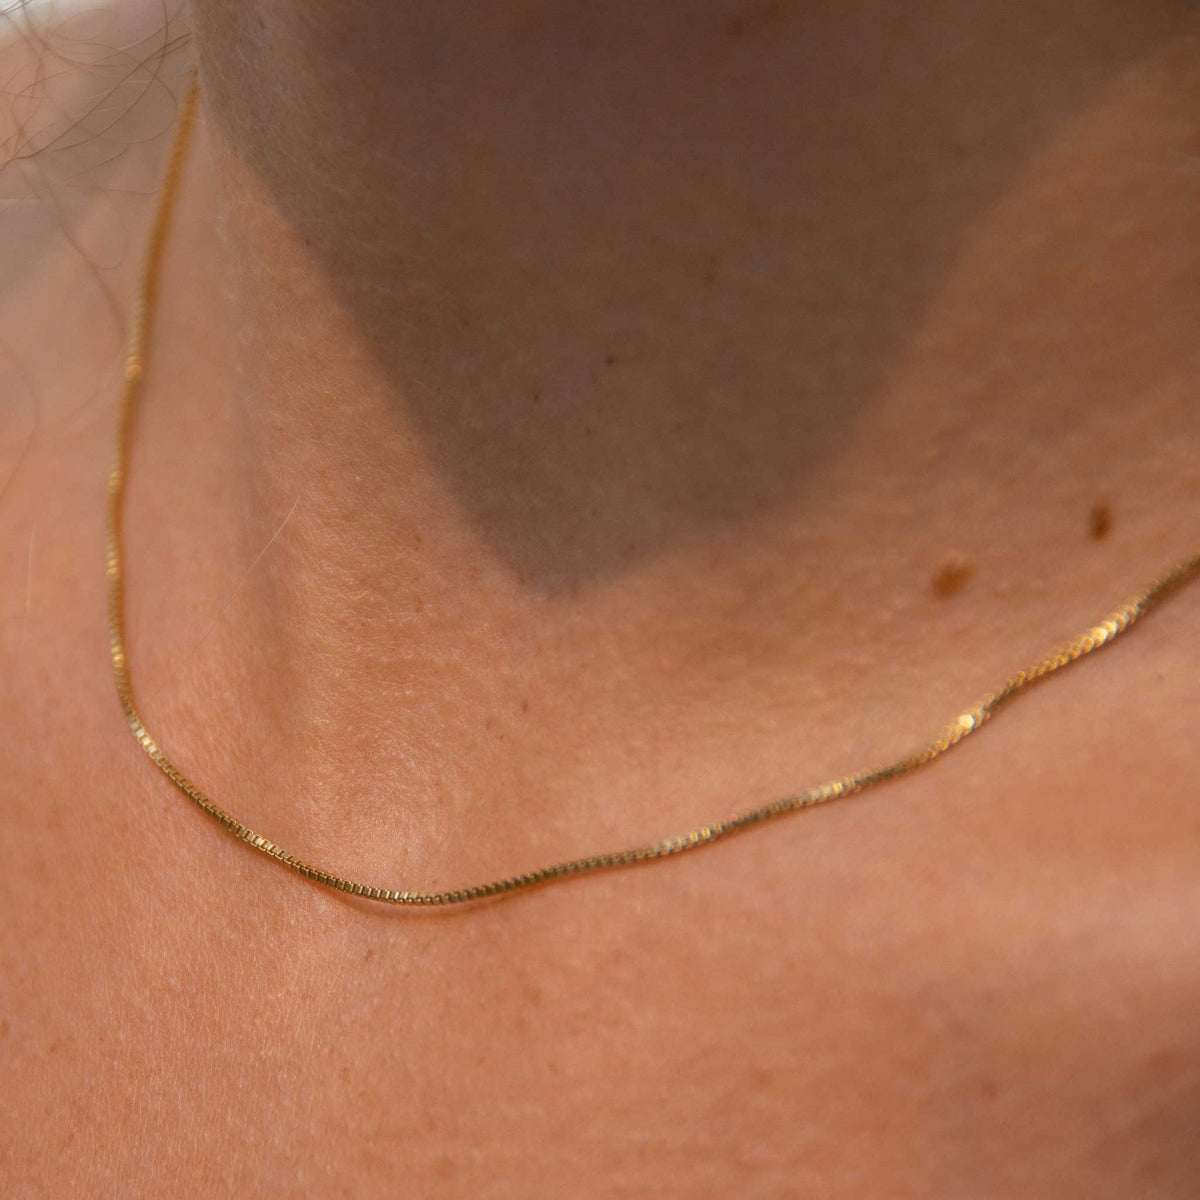 A very up close shot of the box chain necklace with only part of the necklace in focus to highlight the small details.